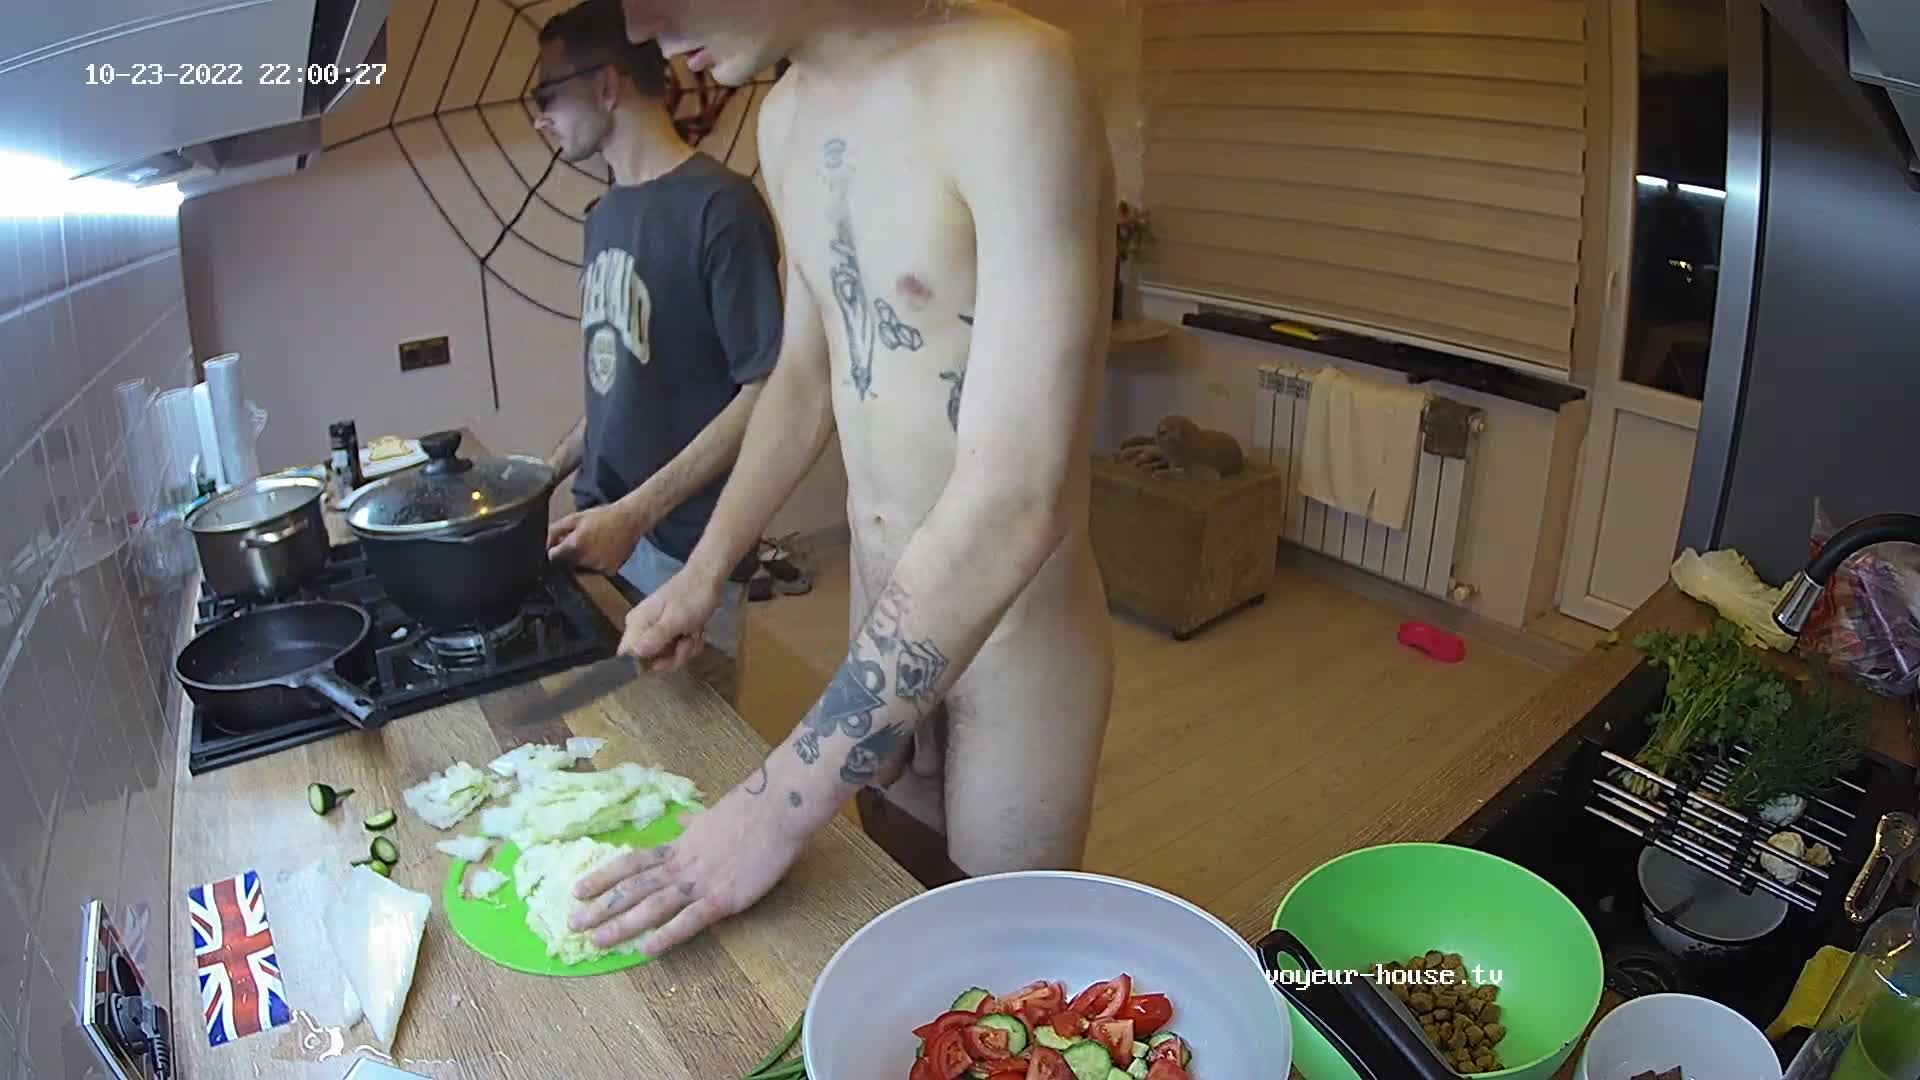 Artem the naked chef 23 Oct 2022